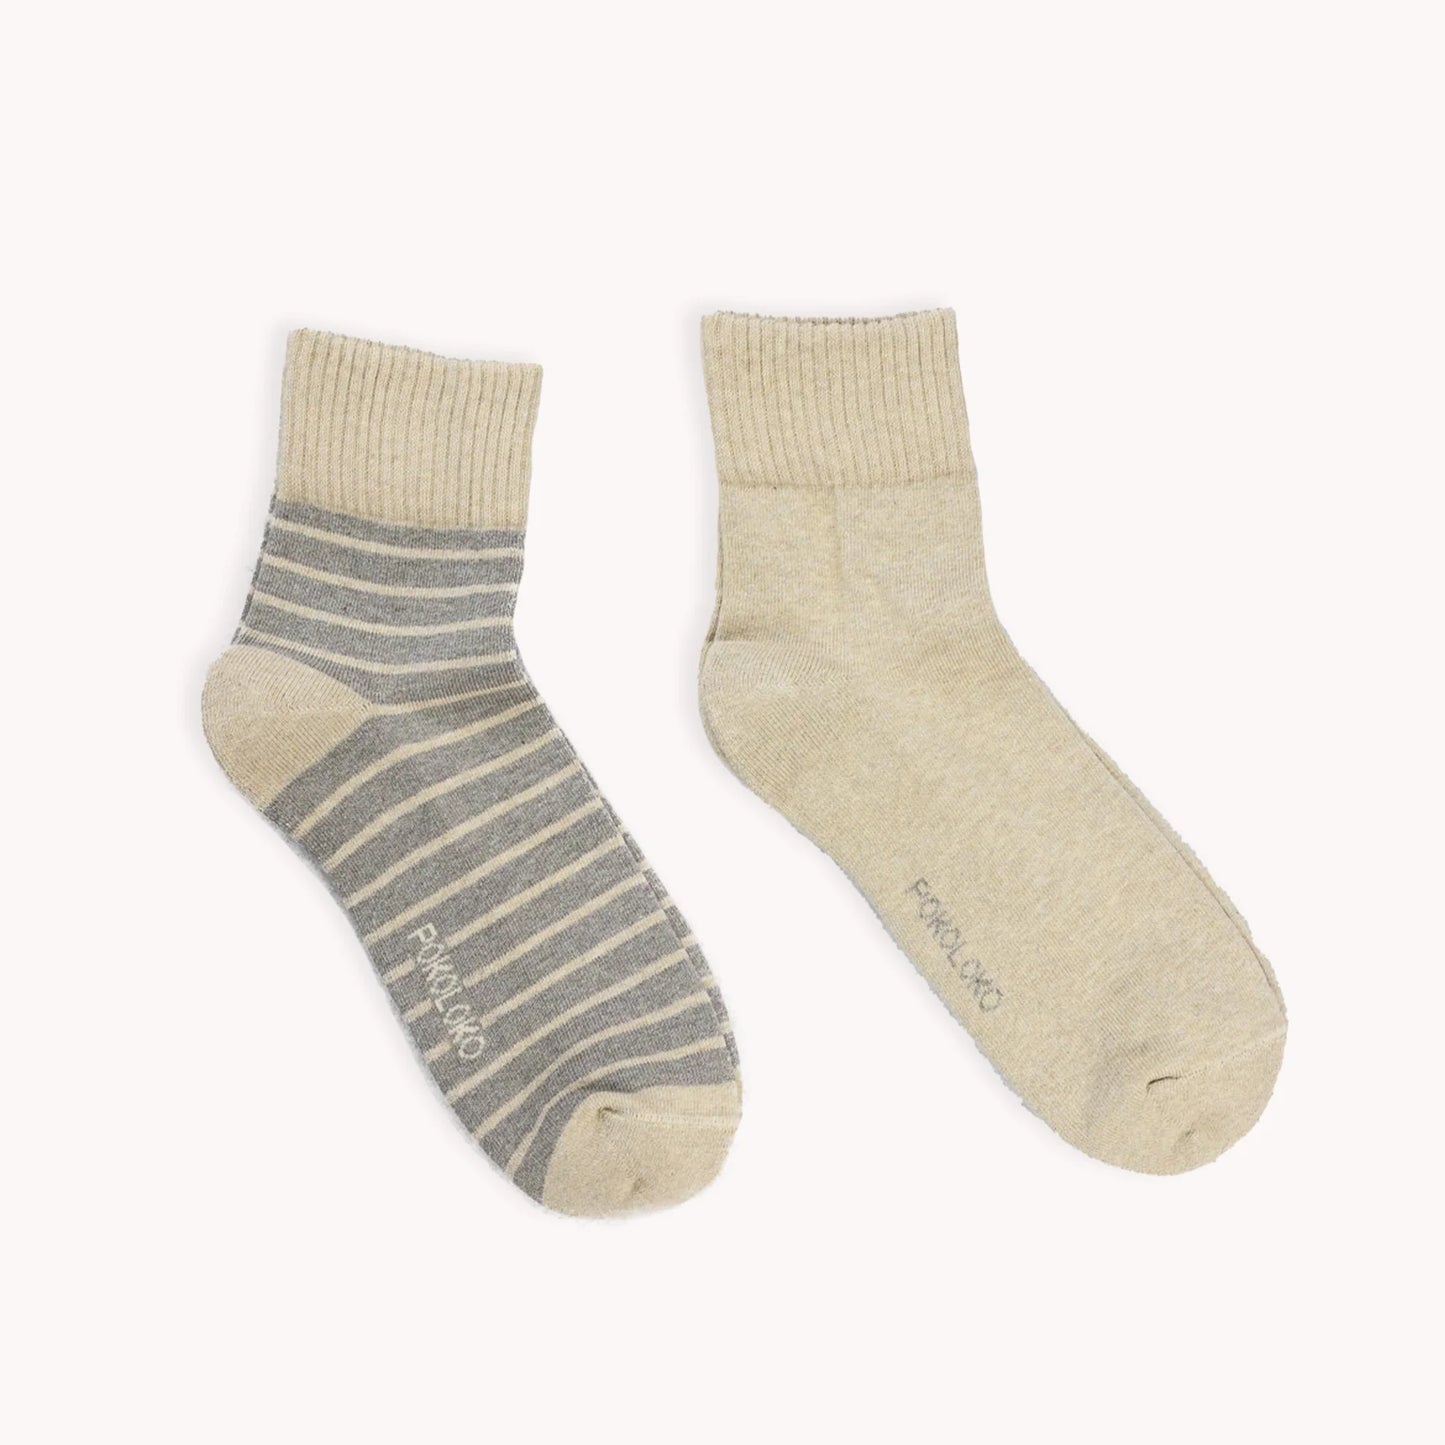 Pima Cotton Socks - Striped-Solid Pack of 2